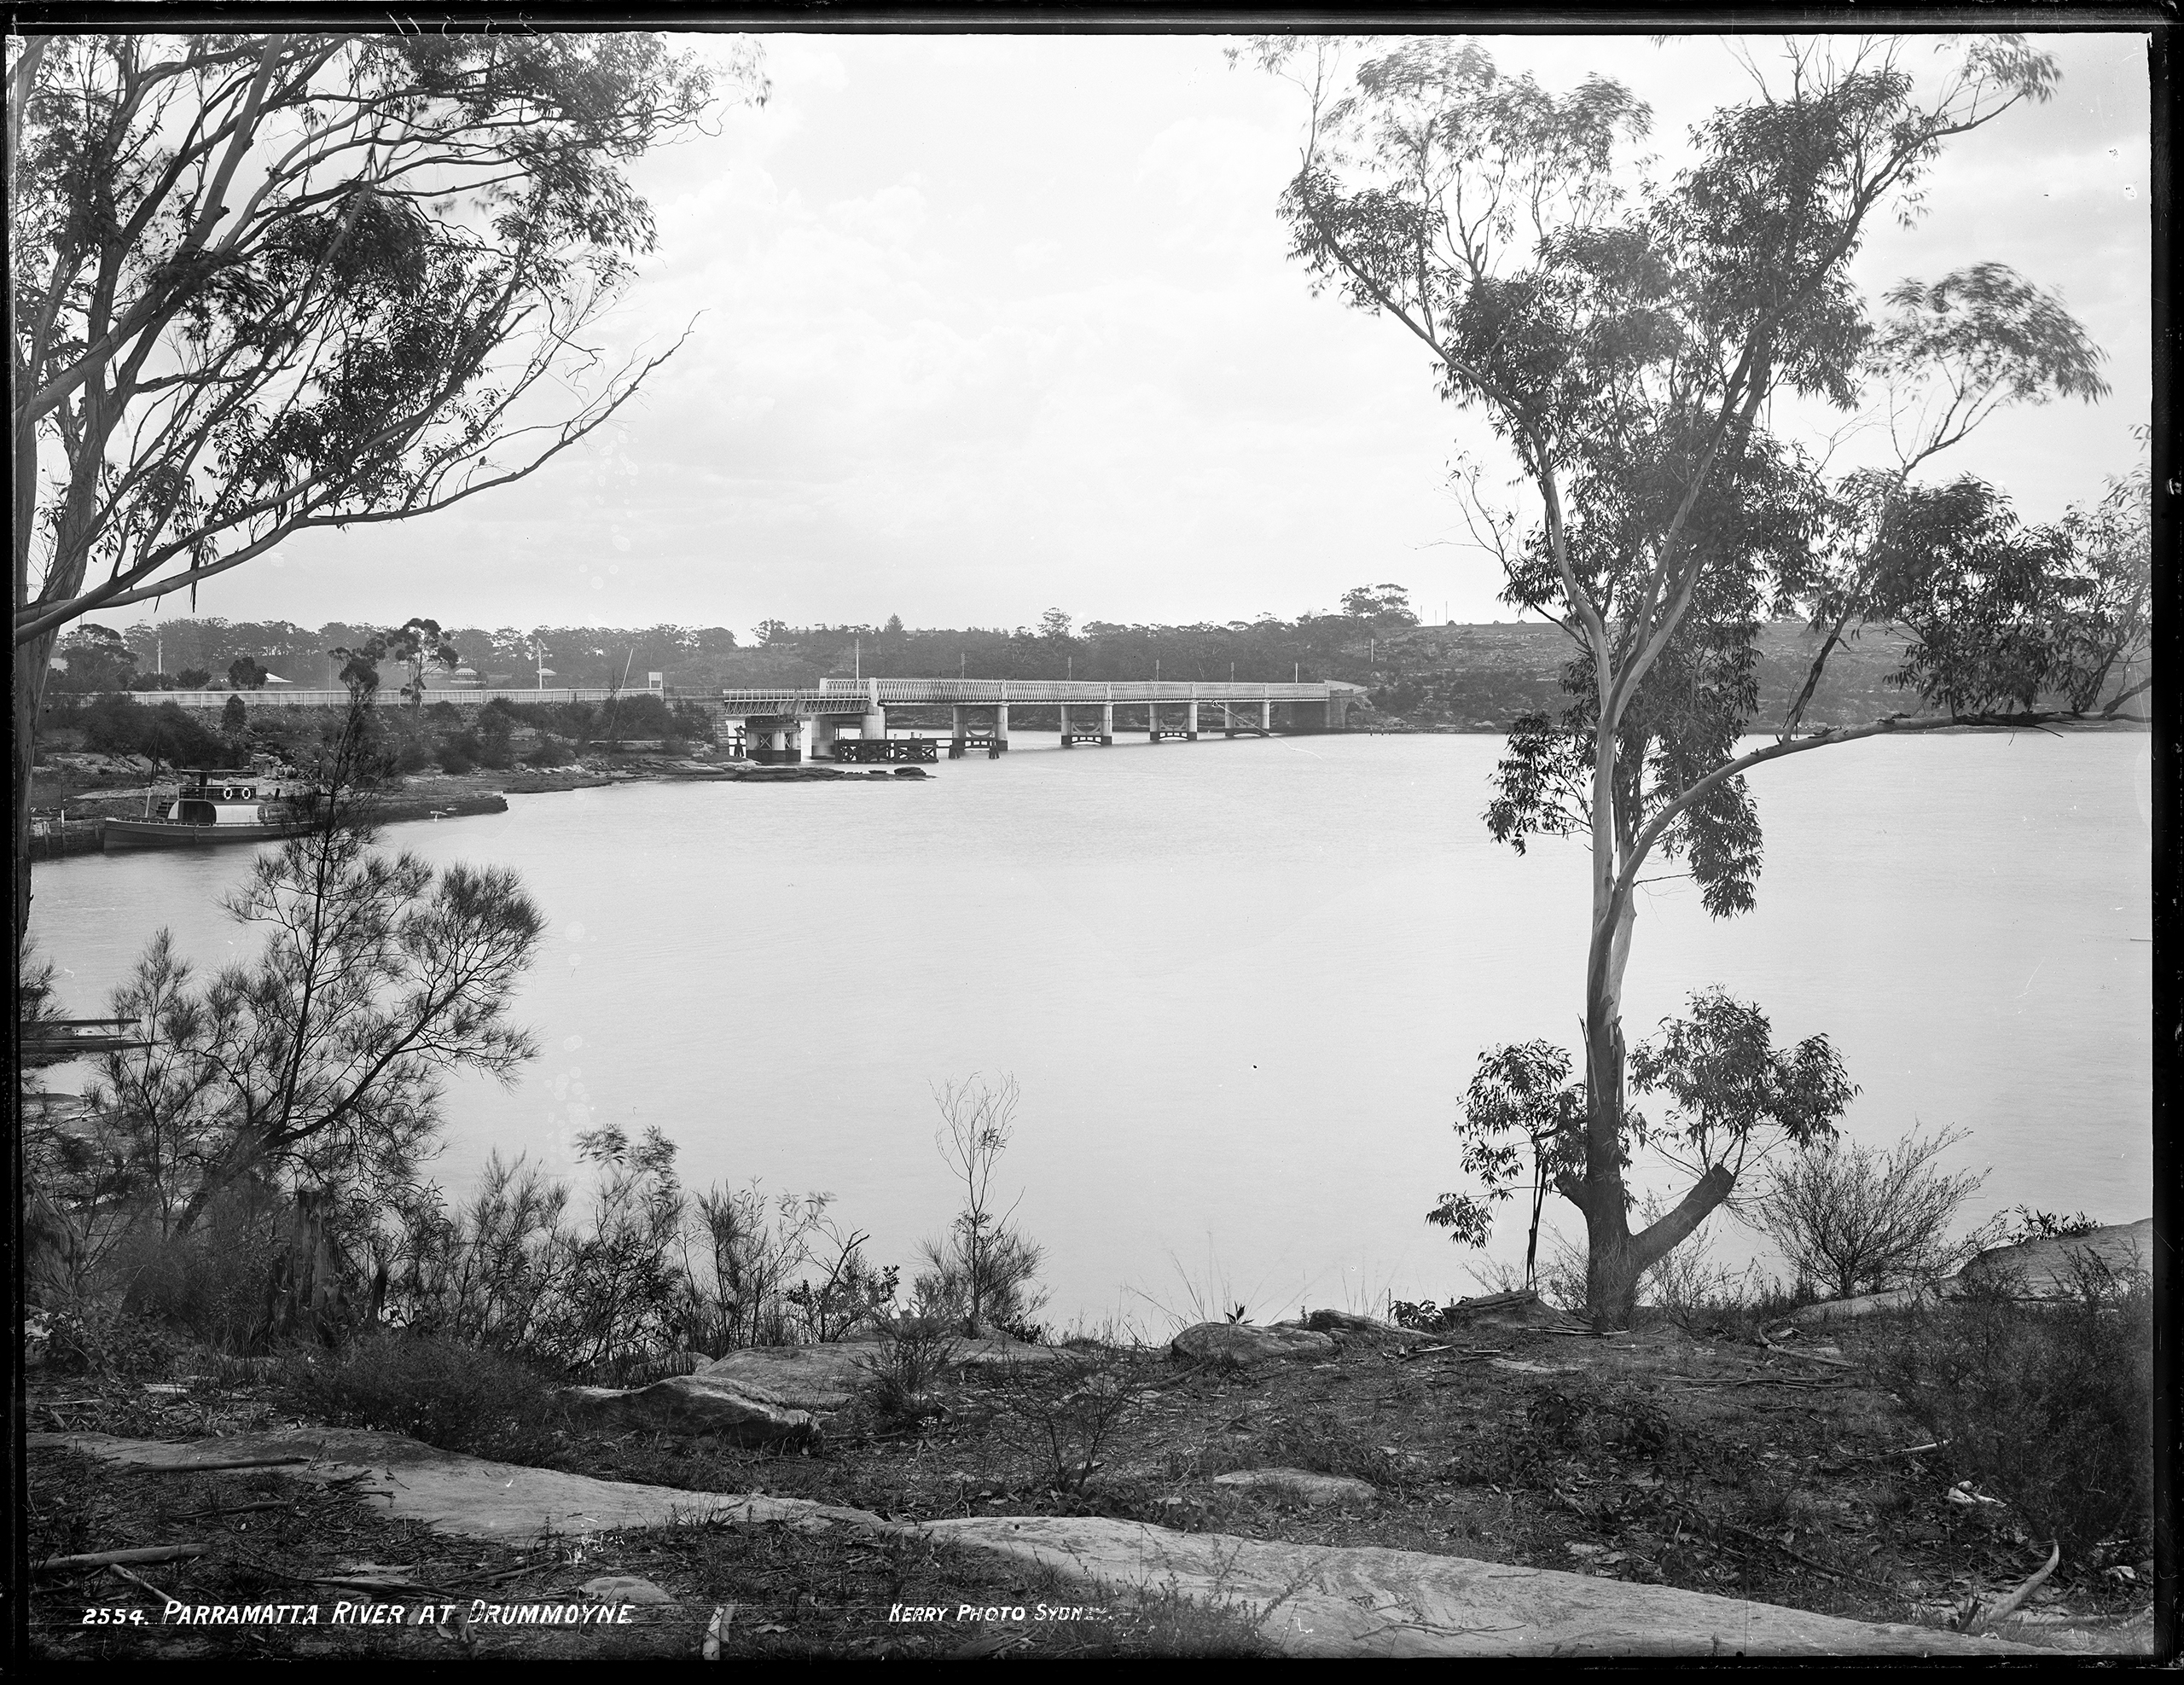 'Parramatta River at Drummoyne' by Kerry and Co